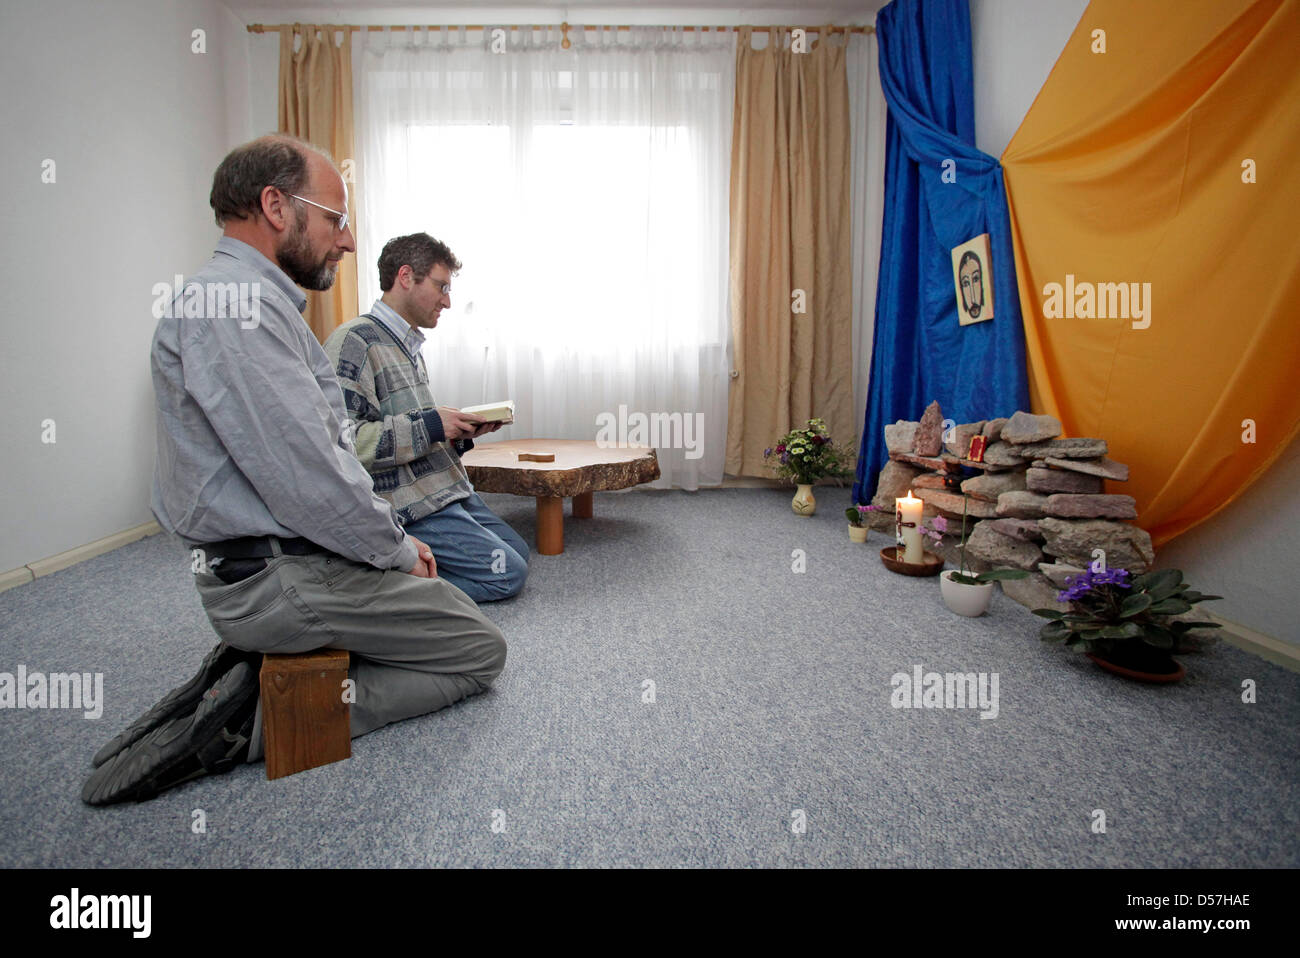 Brothers Andreas (L) and Gianluca (R) of the order 'Little Brothers of the Gospel' pray in a flat of a Plattenbau, a building made with precast concrete slabs, in Leipzig, Germany, 27 April 2010. The order is accepted since 1968. Photo: Jan Woitas Stock Photo